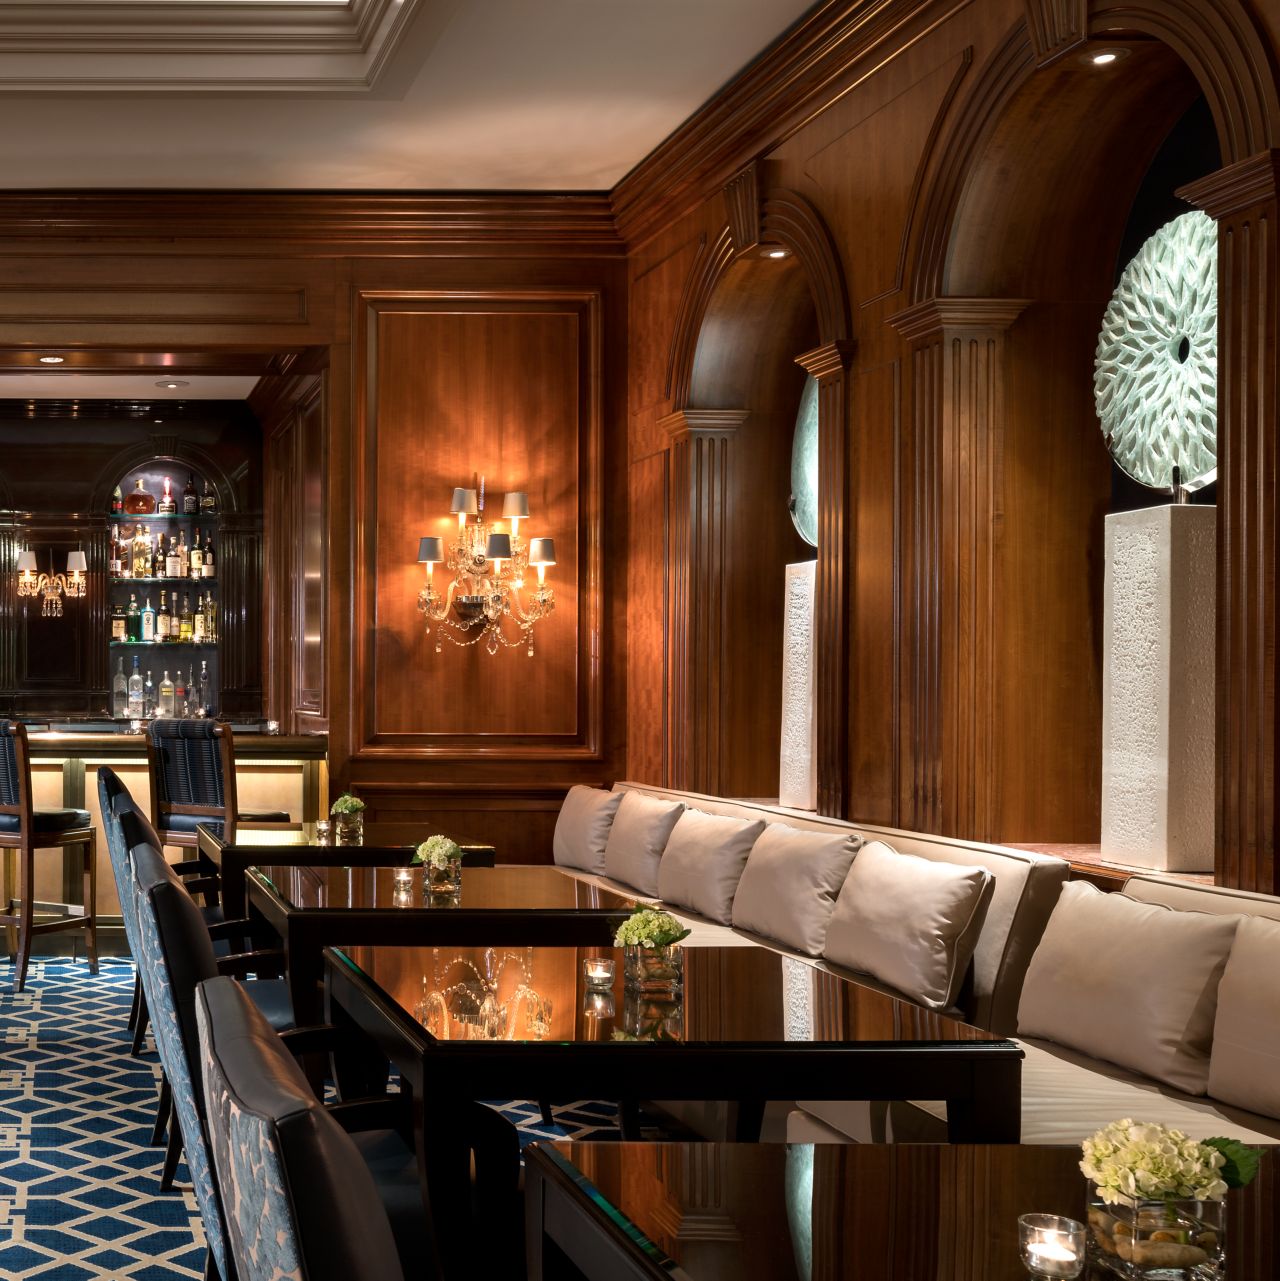 Banquettes, dining tables and a bar in a room with patterned carpeting and wood-paneled walls